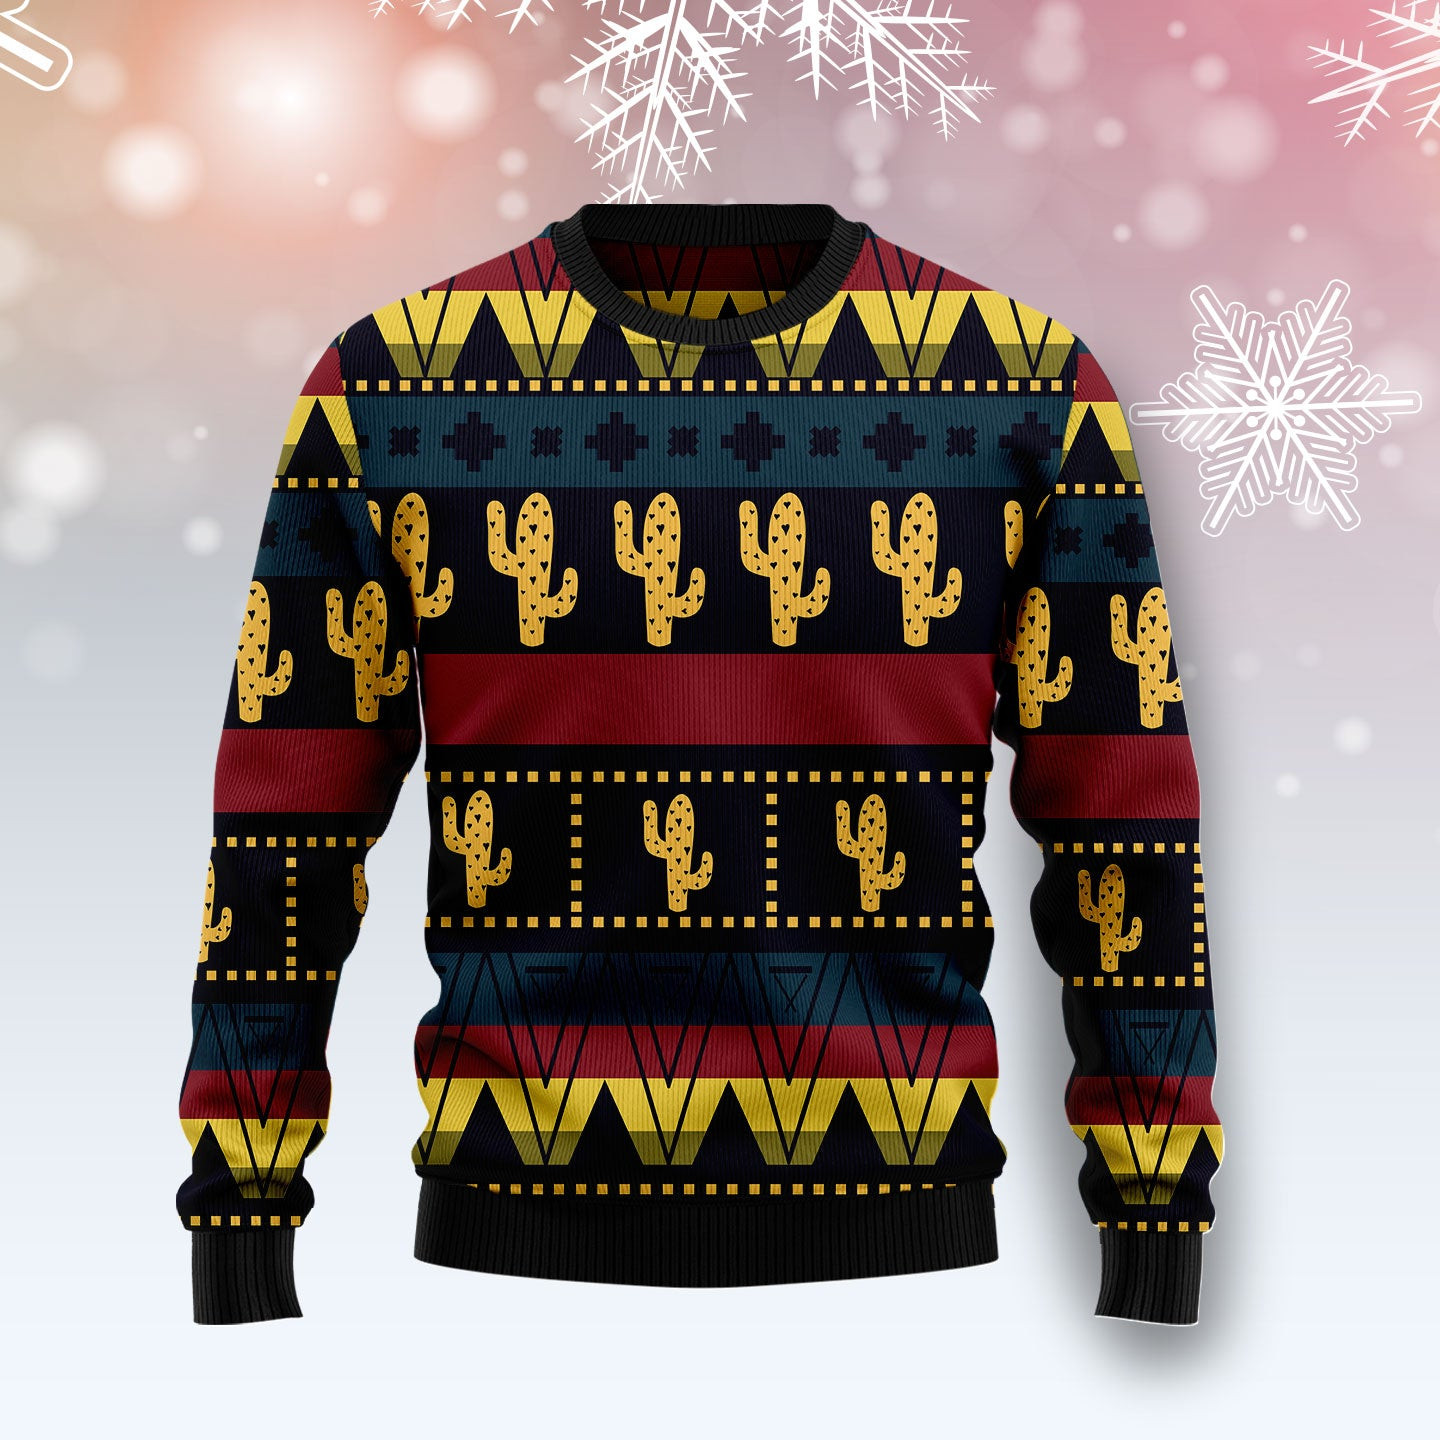 Cactus Group Pattern Ugly Christmas Sweater, Ugly Sweater For Men Women, Holiday Sweater